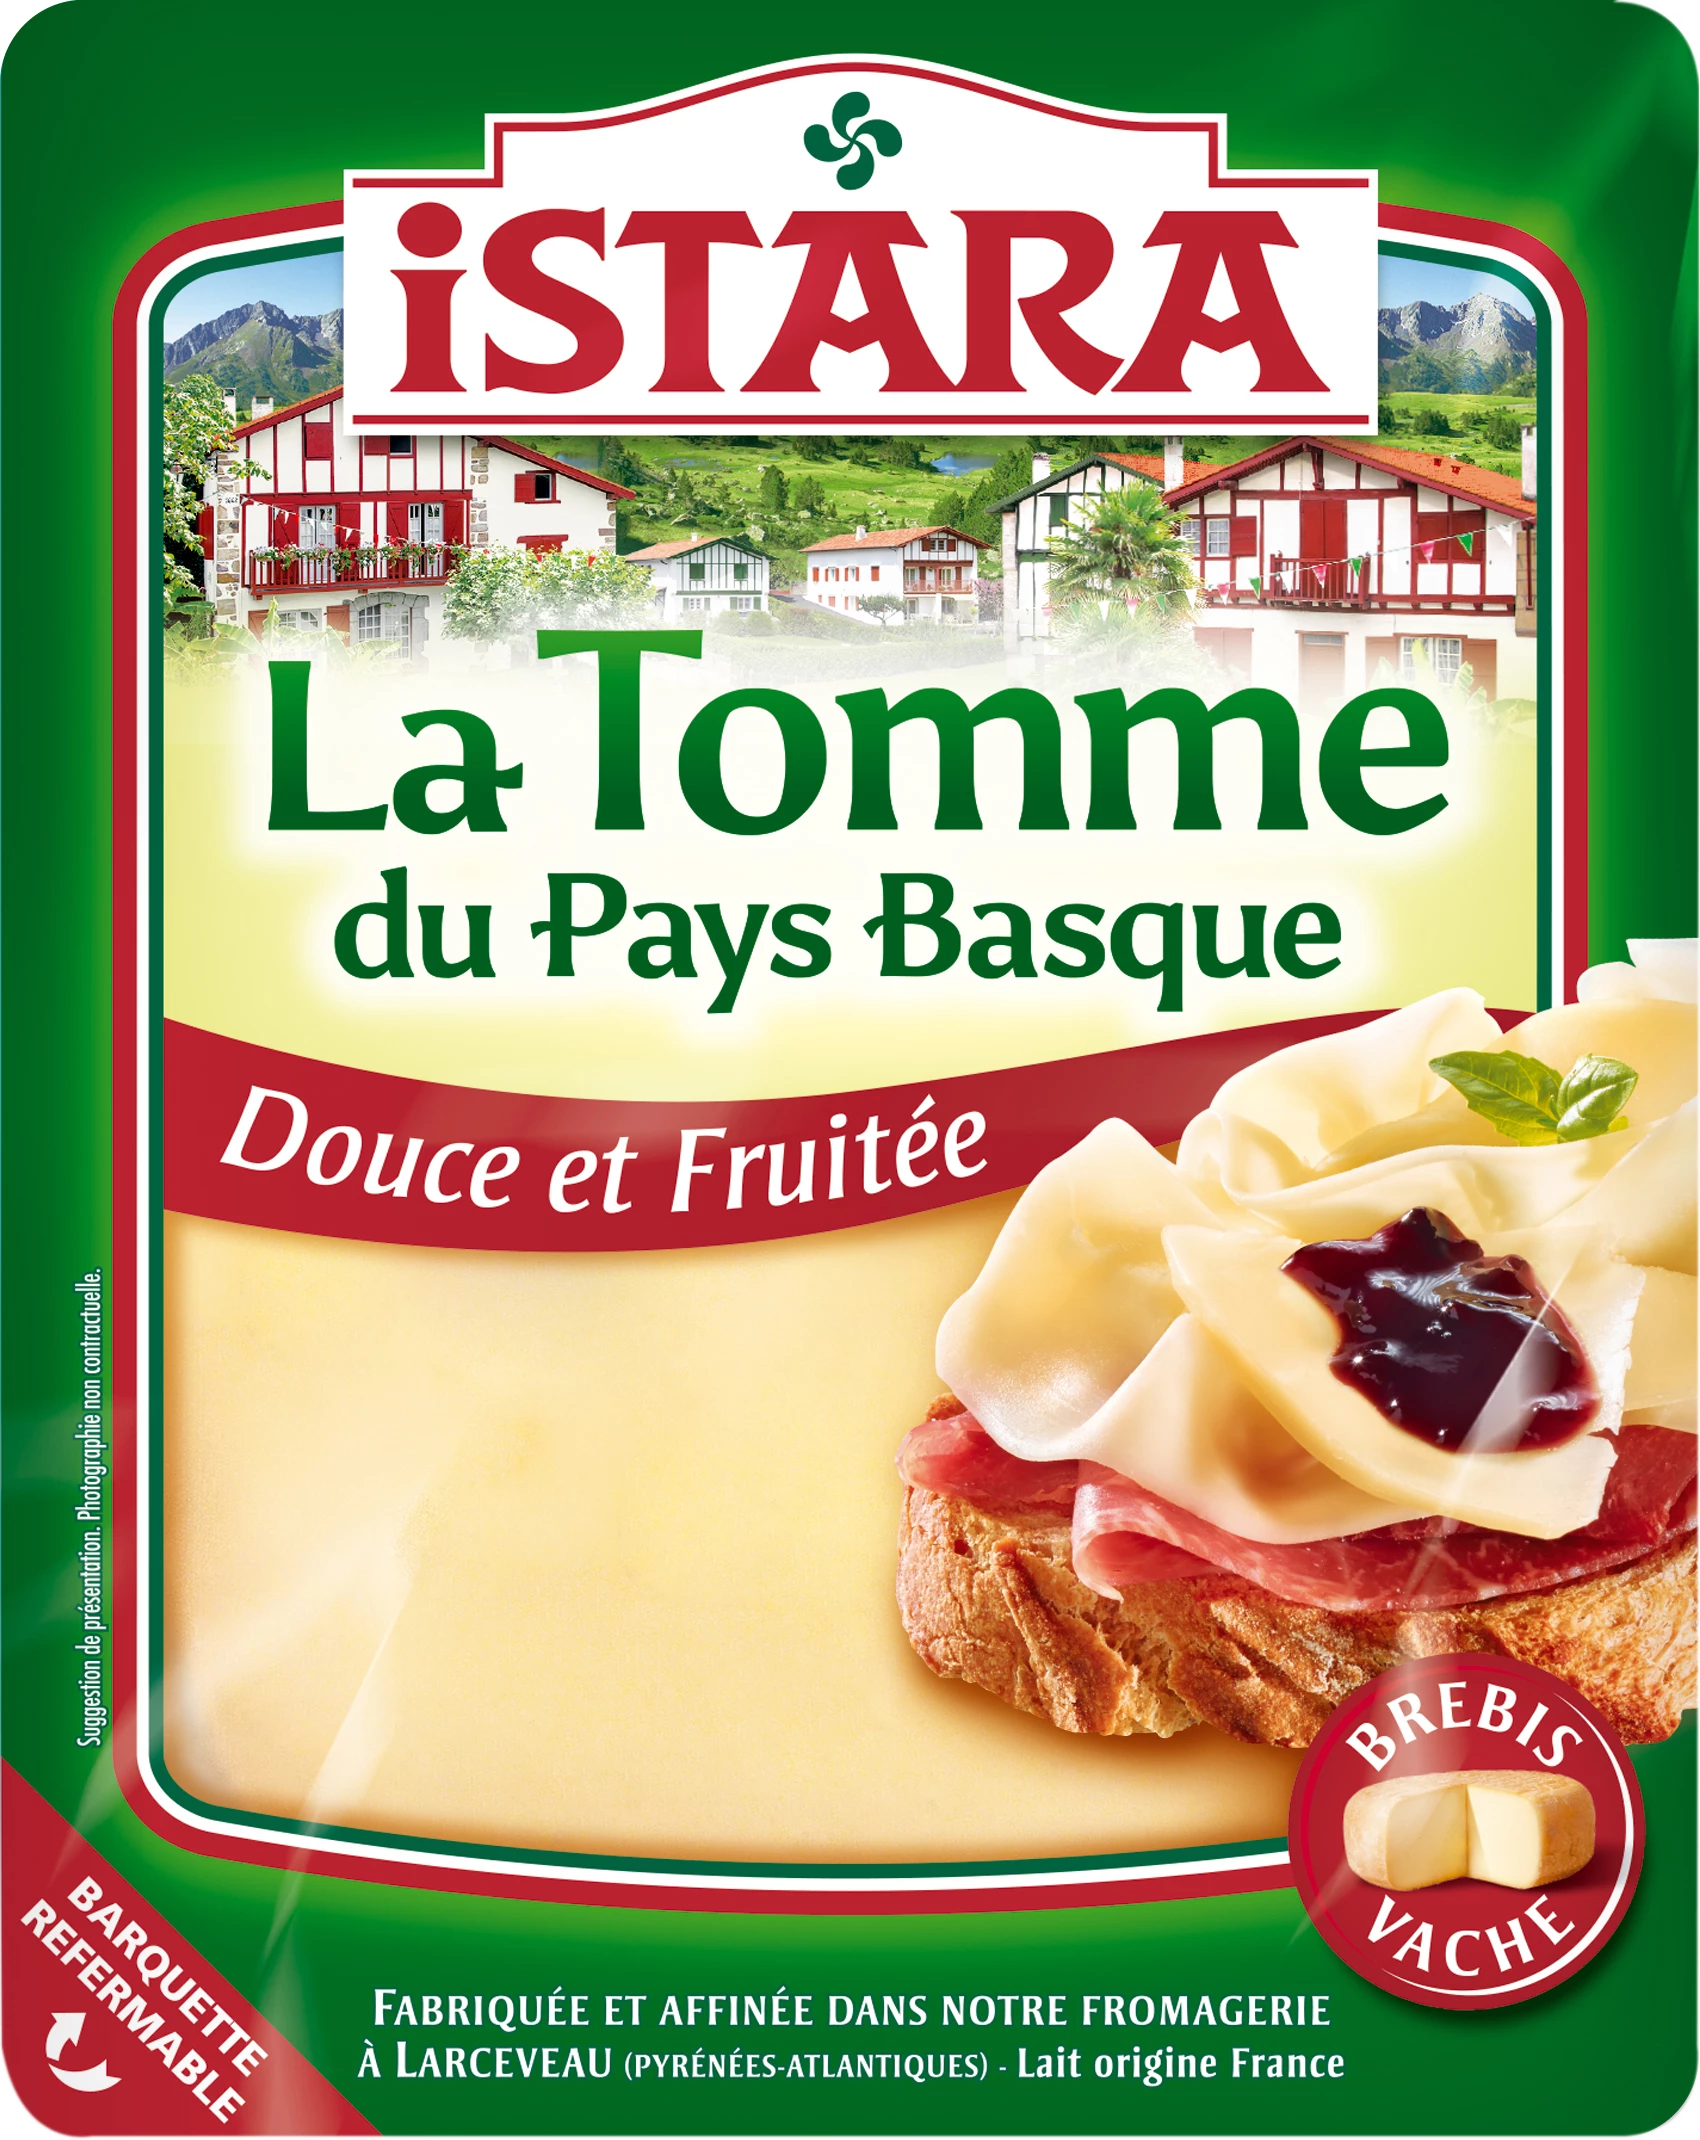 Tomme Pays Basque 180g 31 8 Mg